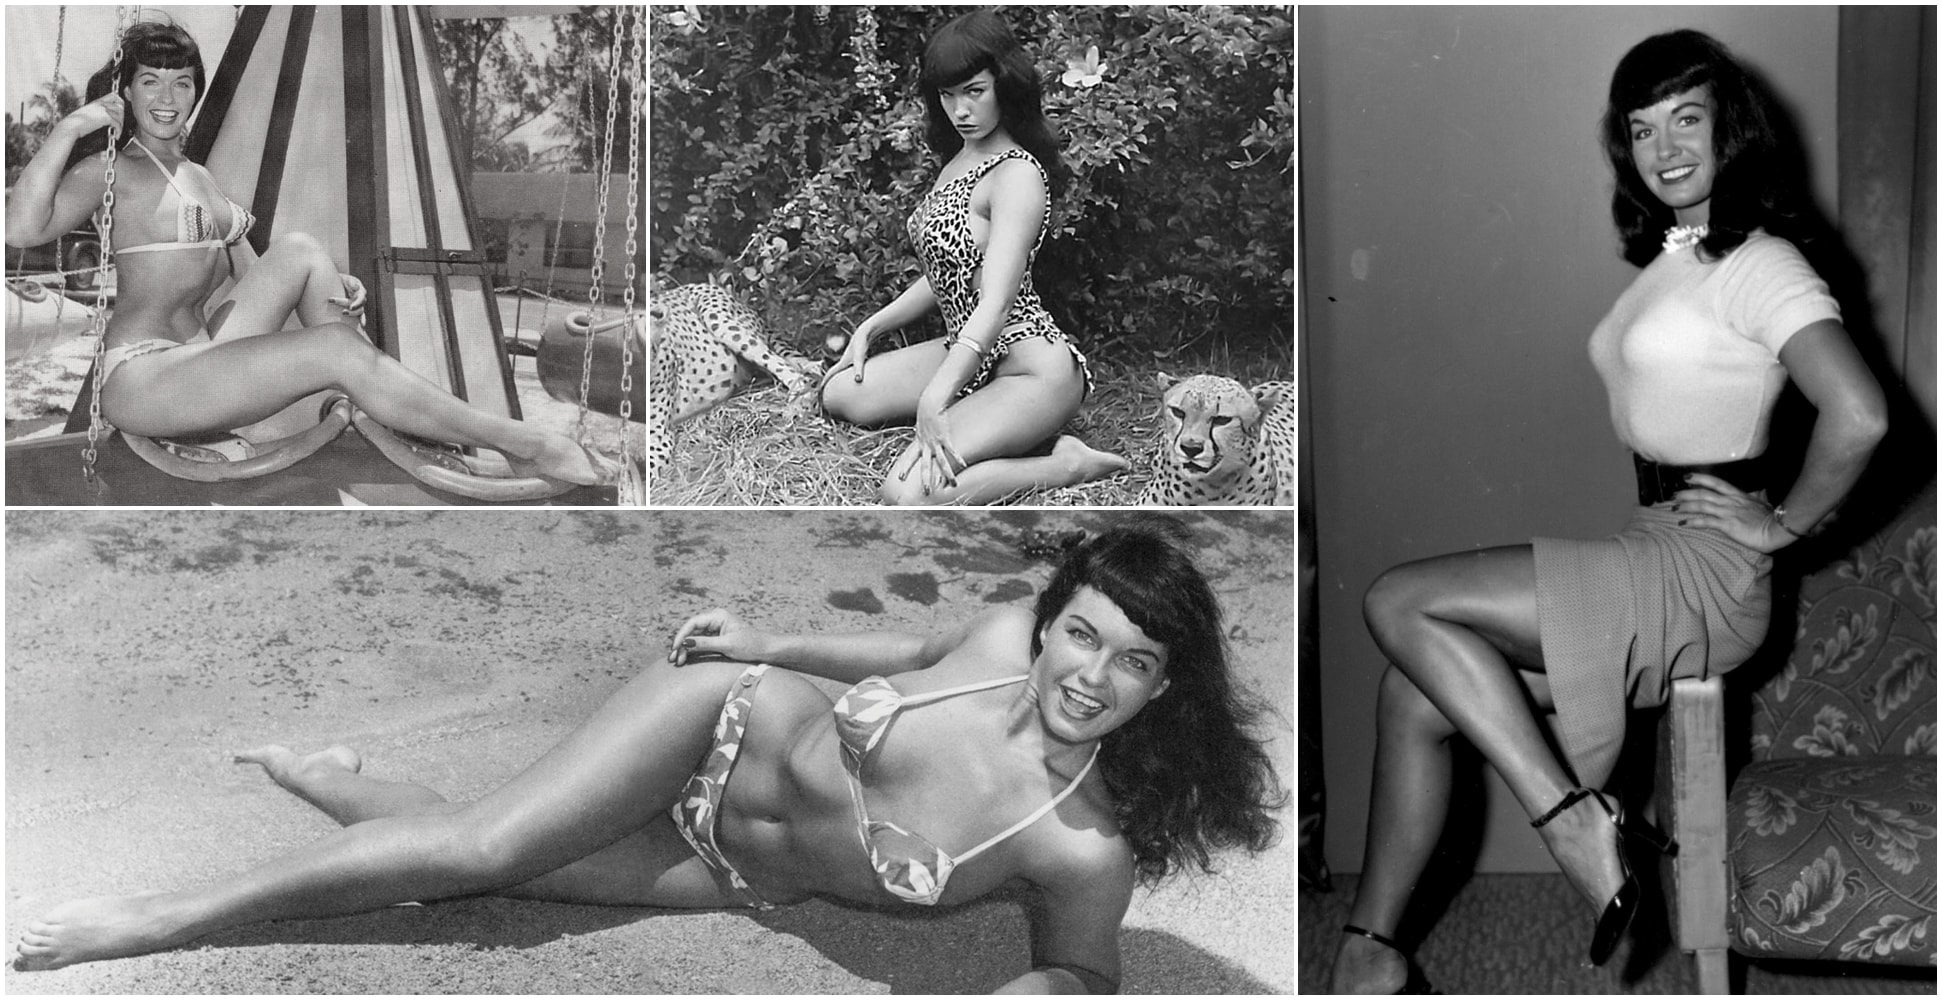 Sexy bettie page